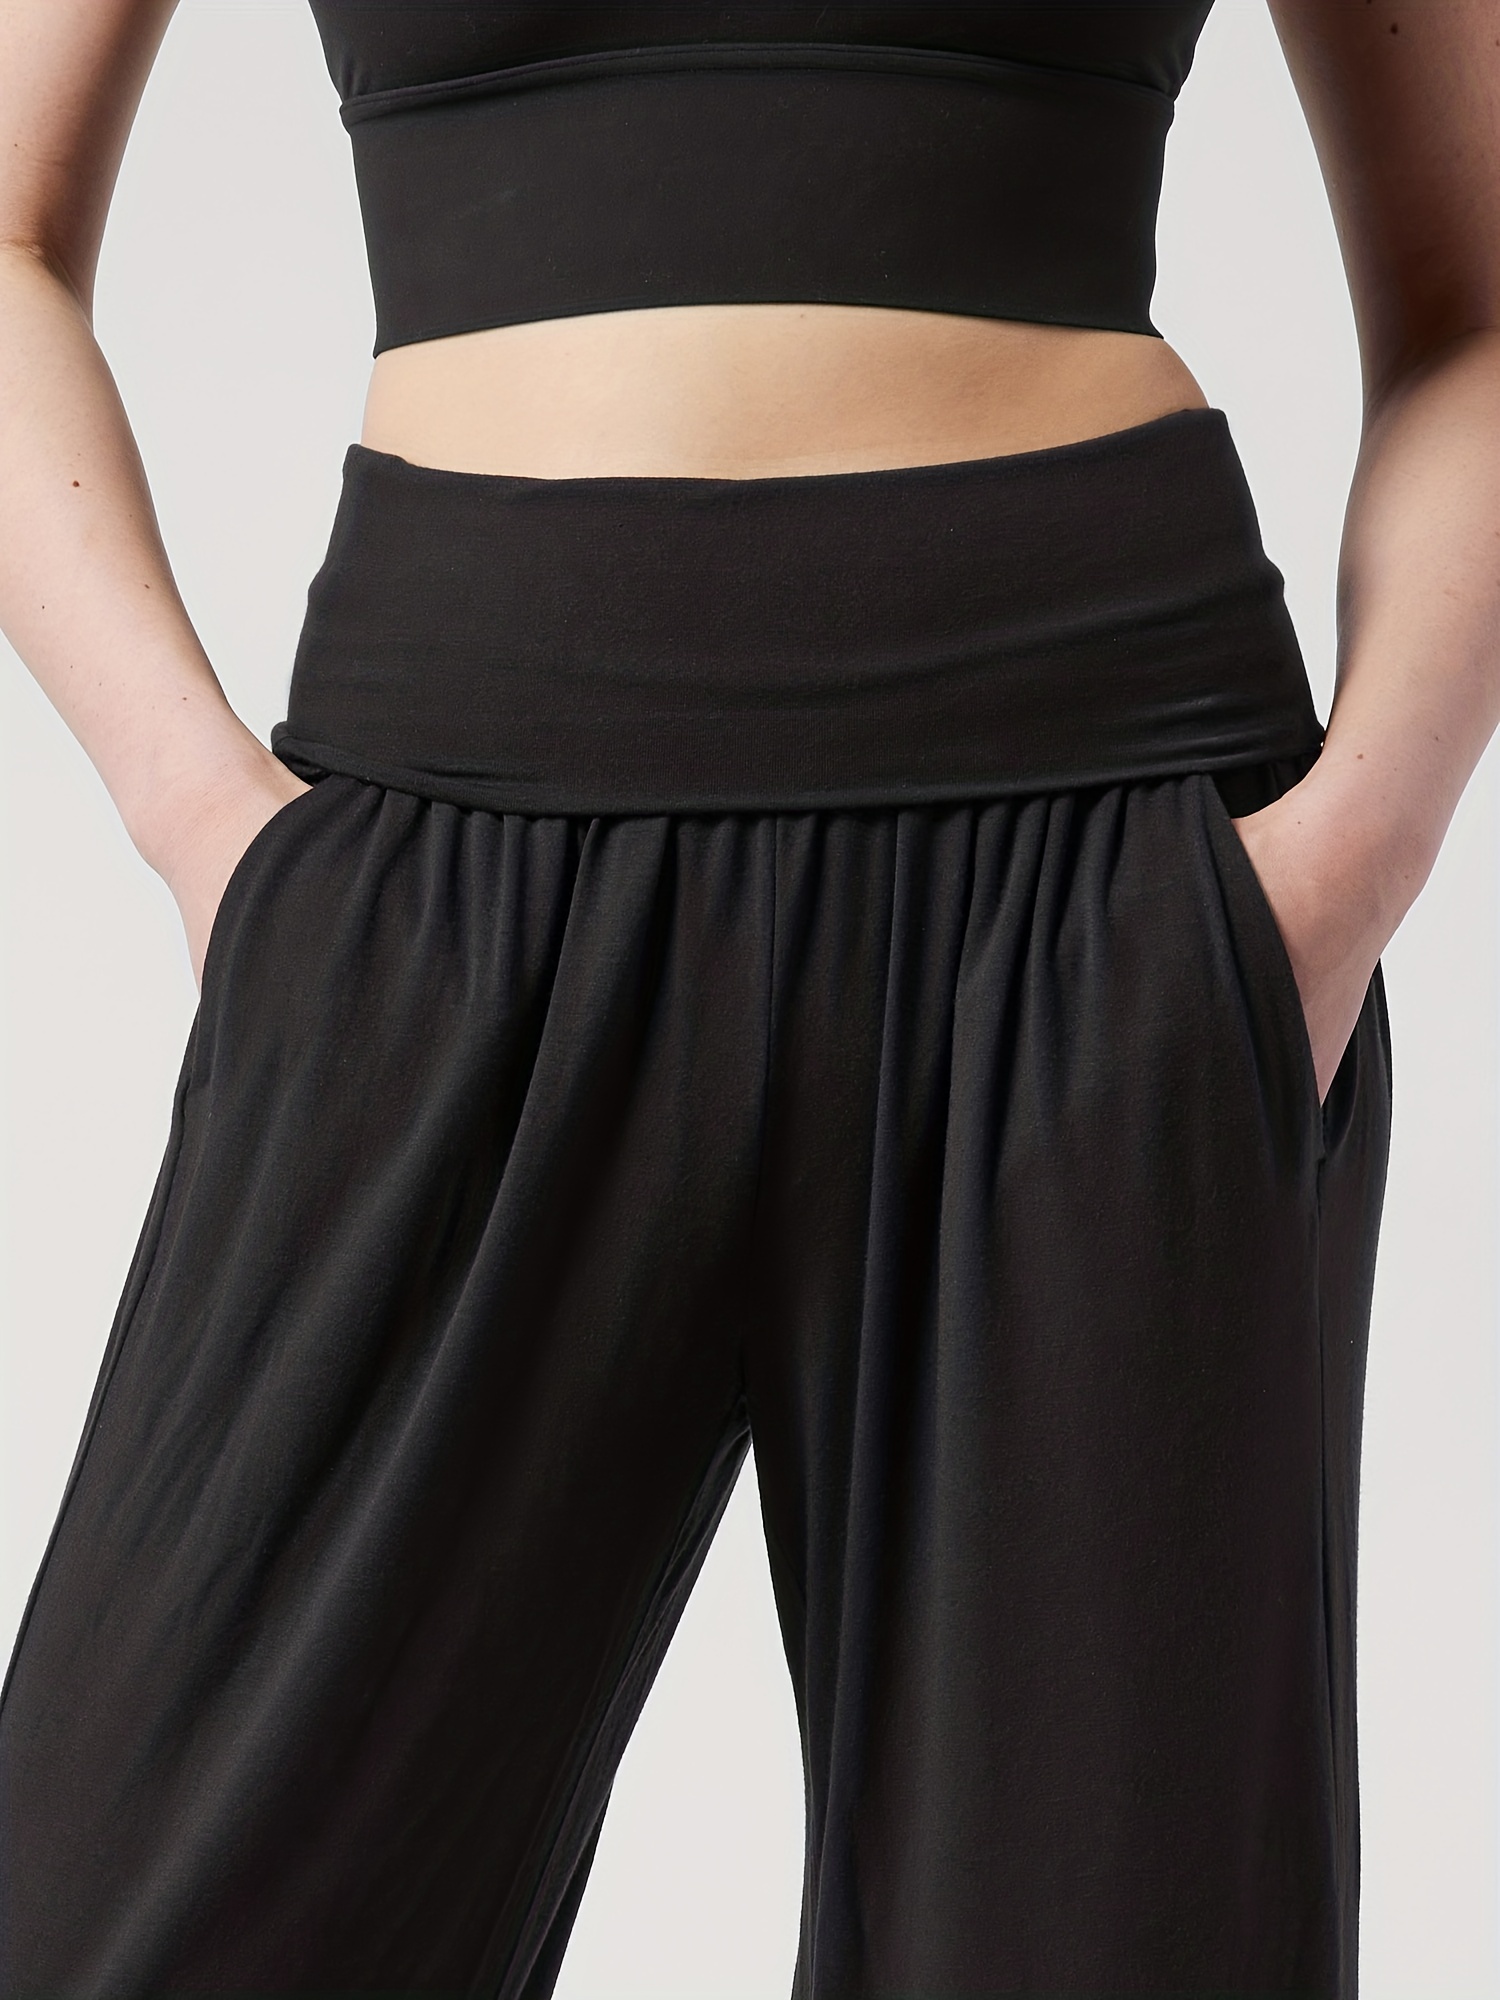 High Waist Wide Leg Cropped Yoga Pants Flare For Women Ideal For Fitness,  Yoga, Dance, Ballet, Running And Training Loose Fit And Comfortable For  Sports From Bdaltogether21, $14.98